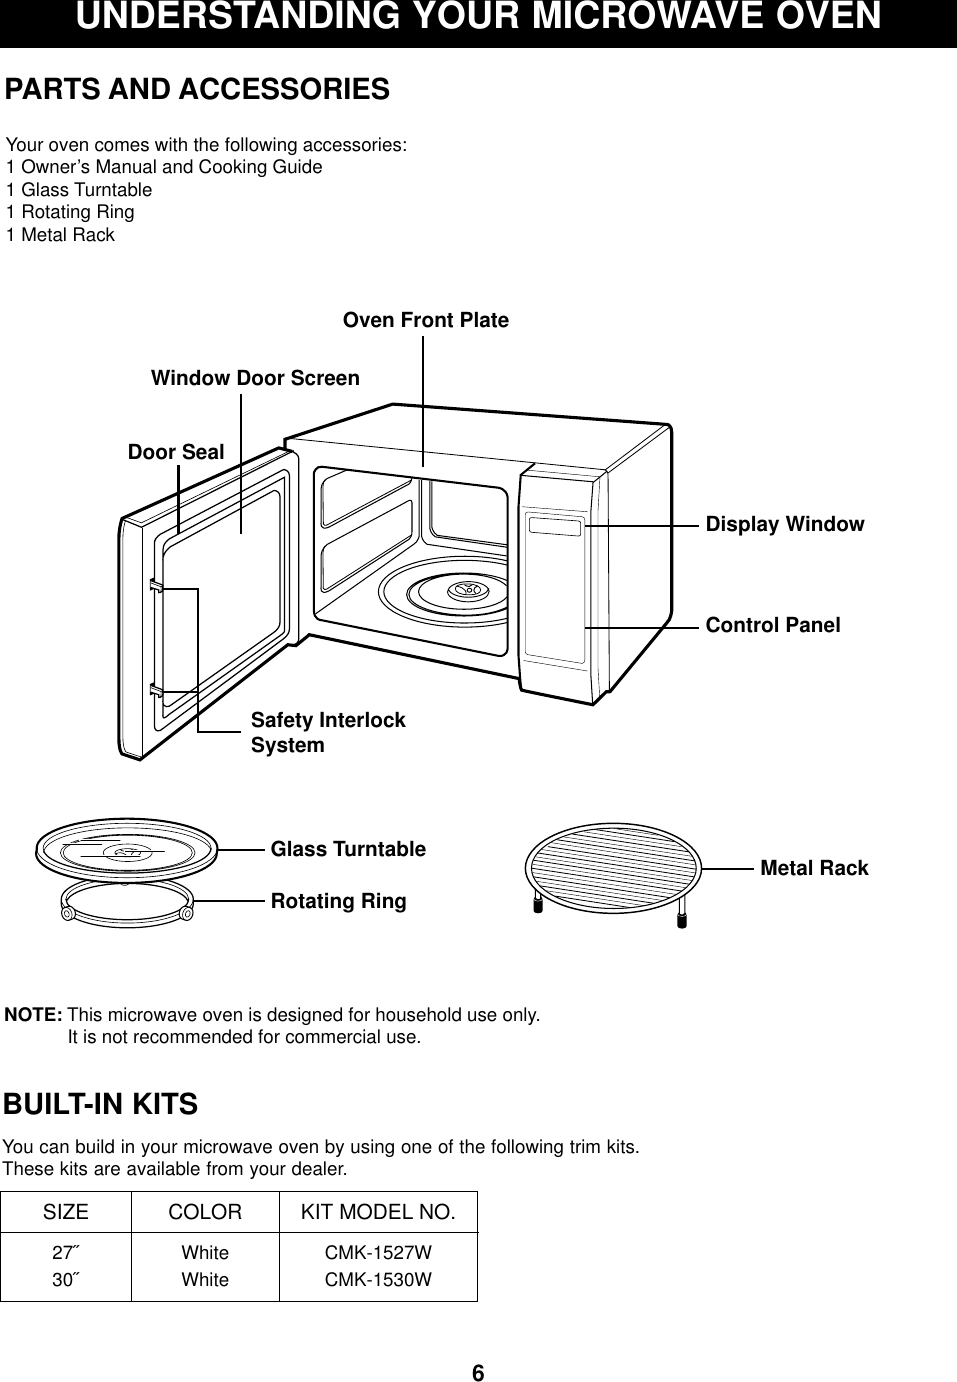 6UNDERSTANDING YOUR MICROWAVE OVENPARTS AND ACCESSORIESYour oven comes with the following accessories:1 Owner’s Manual and Cooking Guide1 Glass Turntable1 Rotating Ring1 Metal RackMetal RackOven Front PlateWindow Door ScreenDoor SealSafety Interlock SystemControl PanelDisplay WindowGlass TurntableRotating RingNOTE: This microwave oven is designed for household use only. It is not recommended for commercial use.BUILT-IN KITSYou can build in your microwave oven by using one of the following trim kits. These kits are available from your dealer.SIZE27˝30˝COLORWhiteWhiteKIT MODEL NO.CMK-1527WCMK-1530W